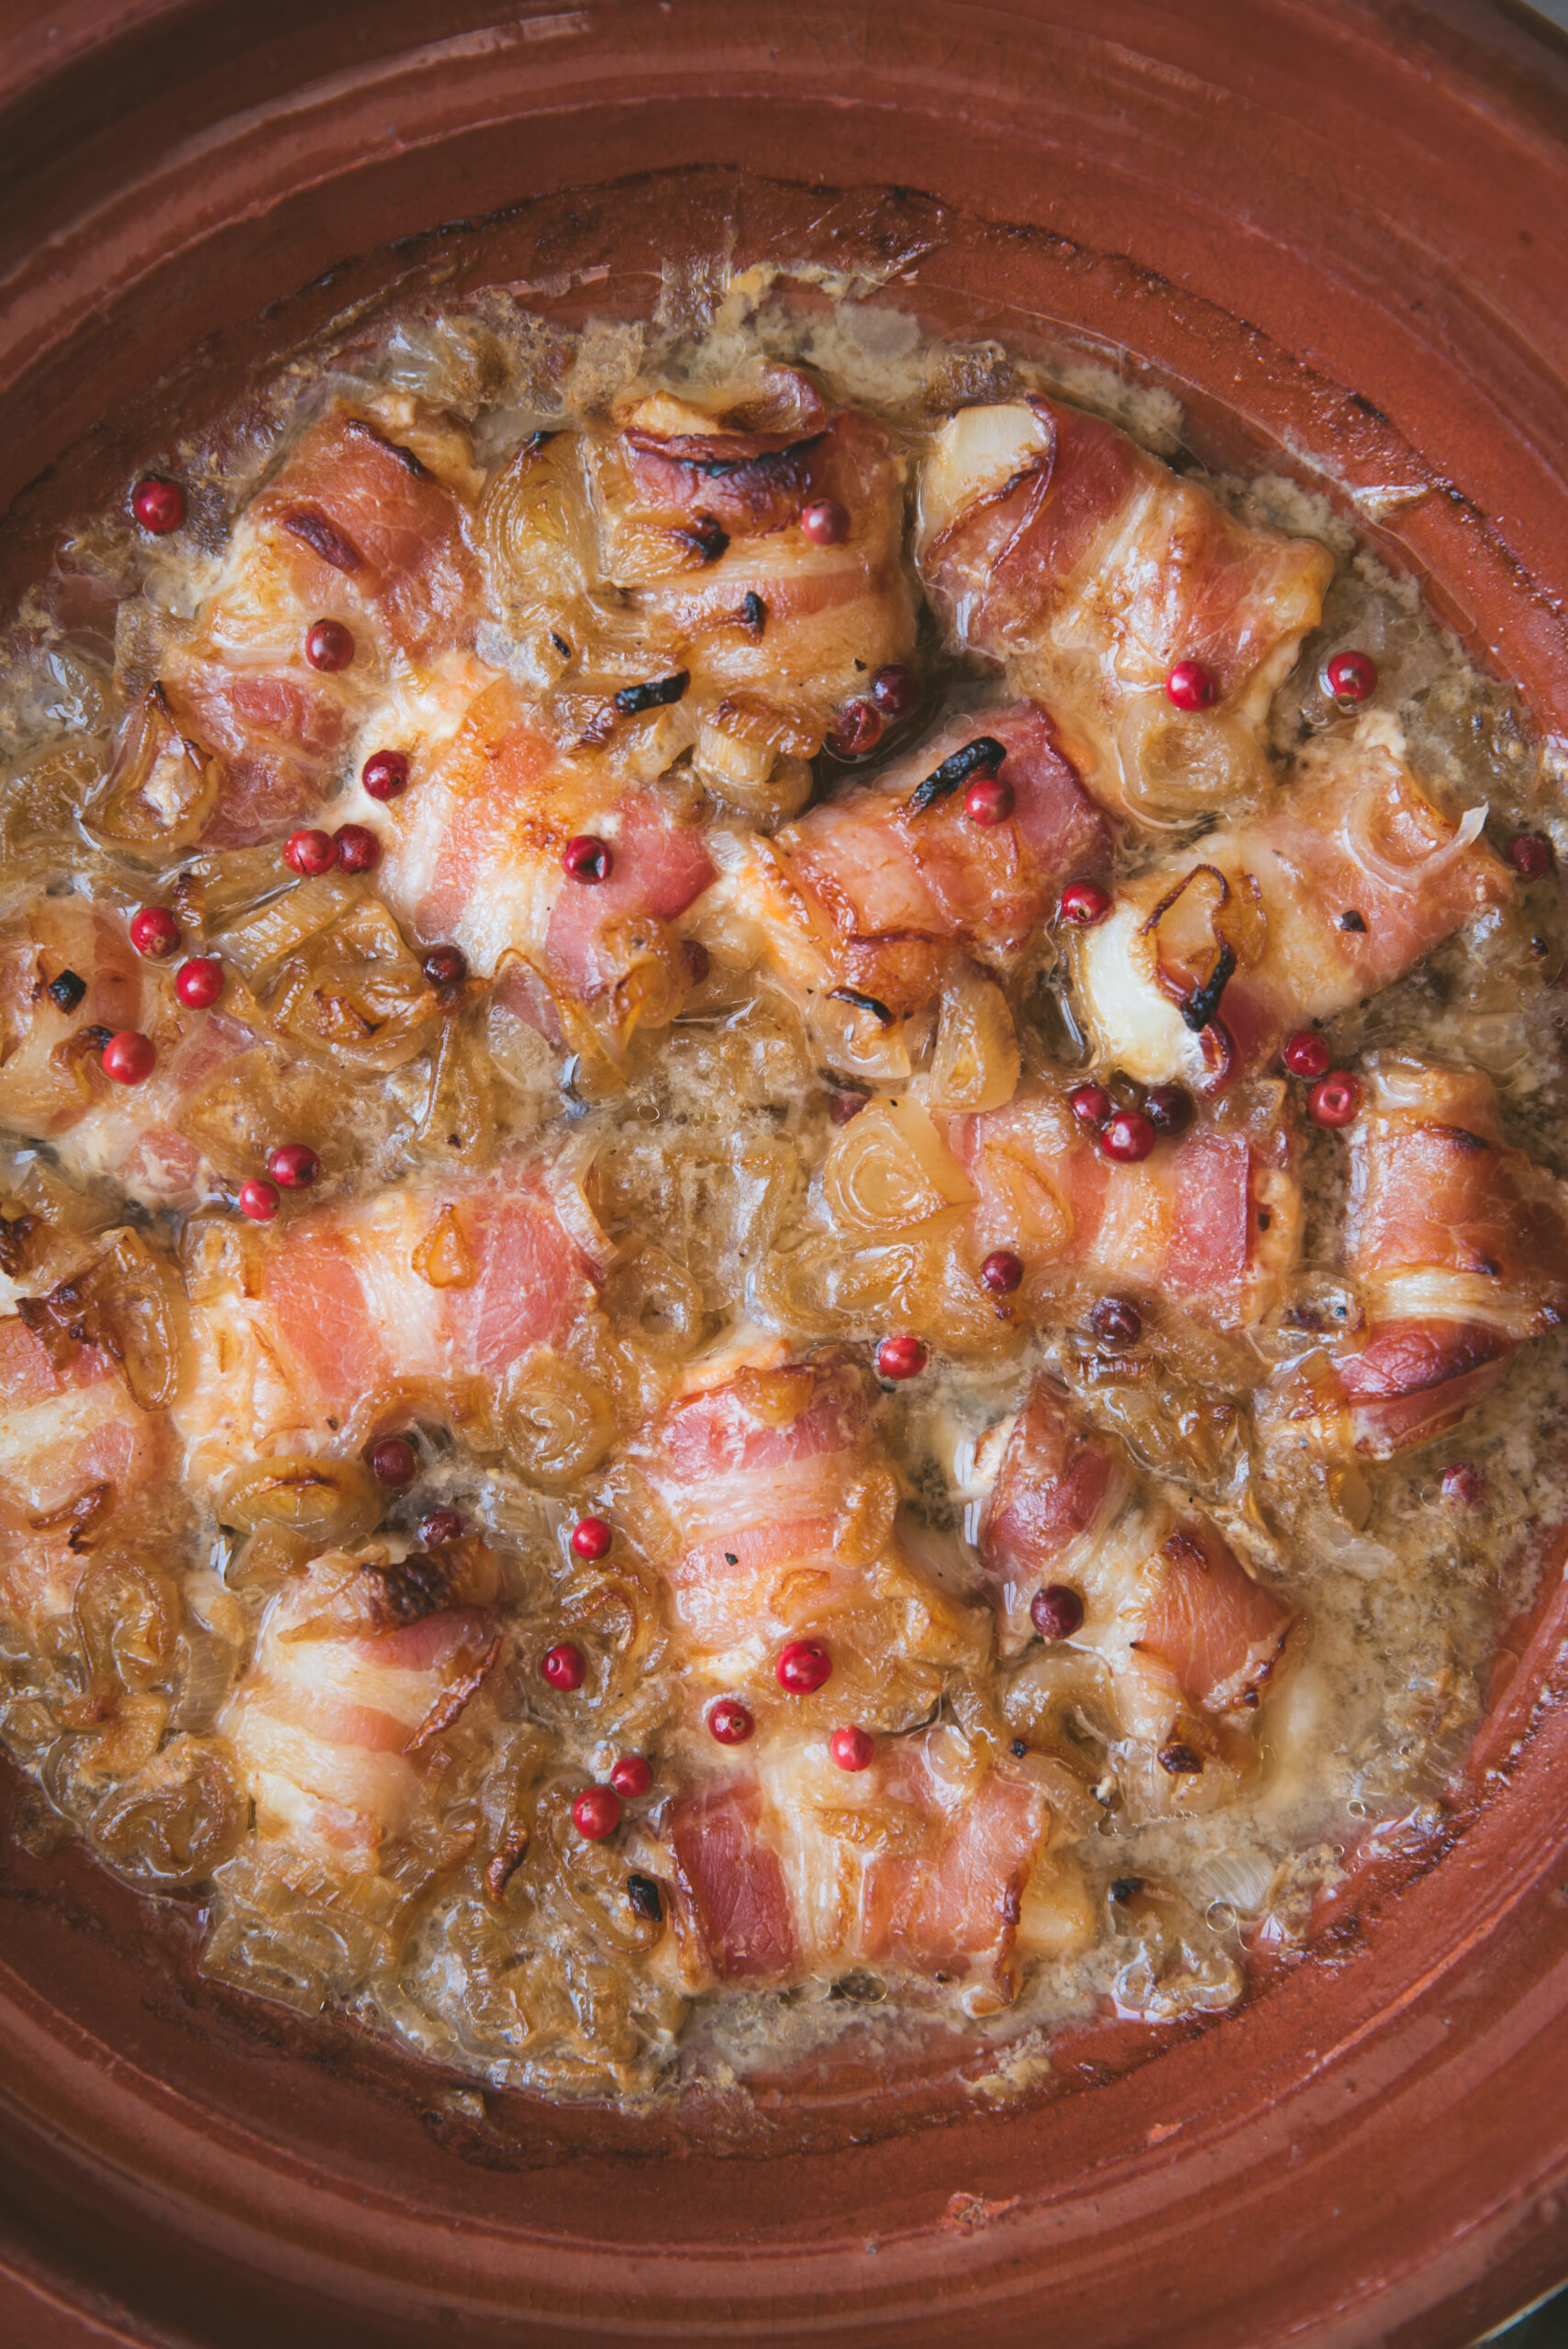 Cider Braised Fish with Bacon and Shallot